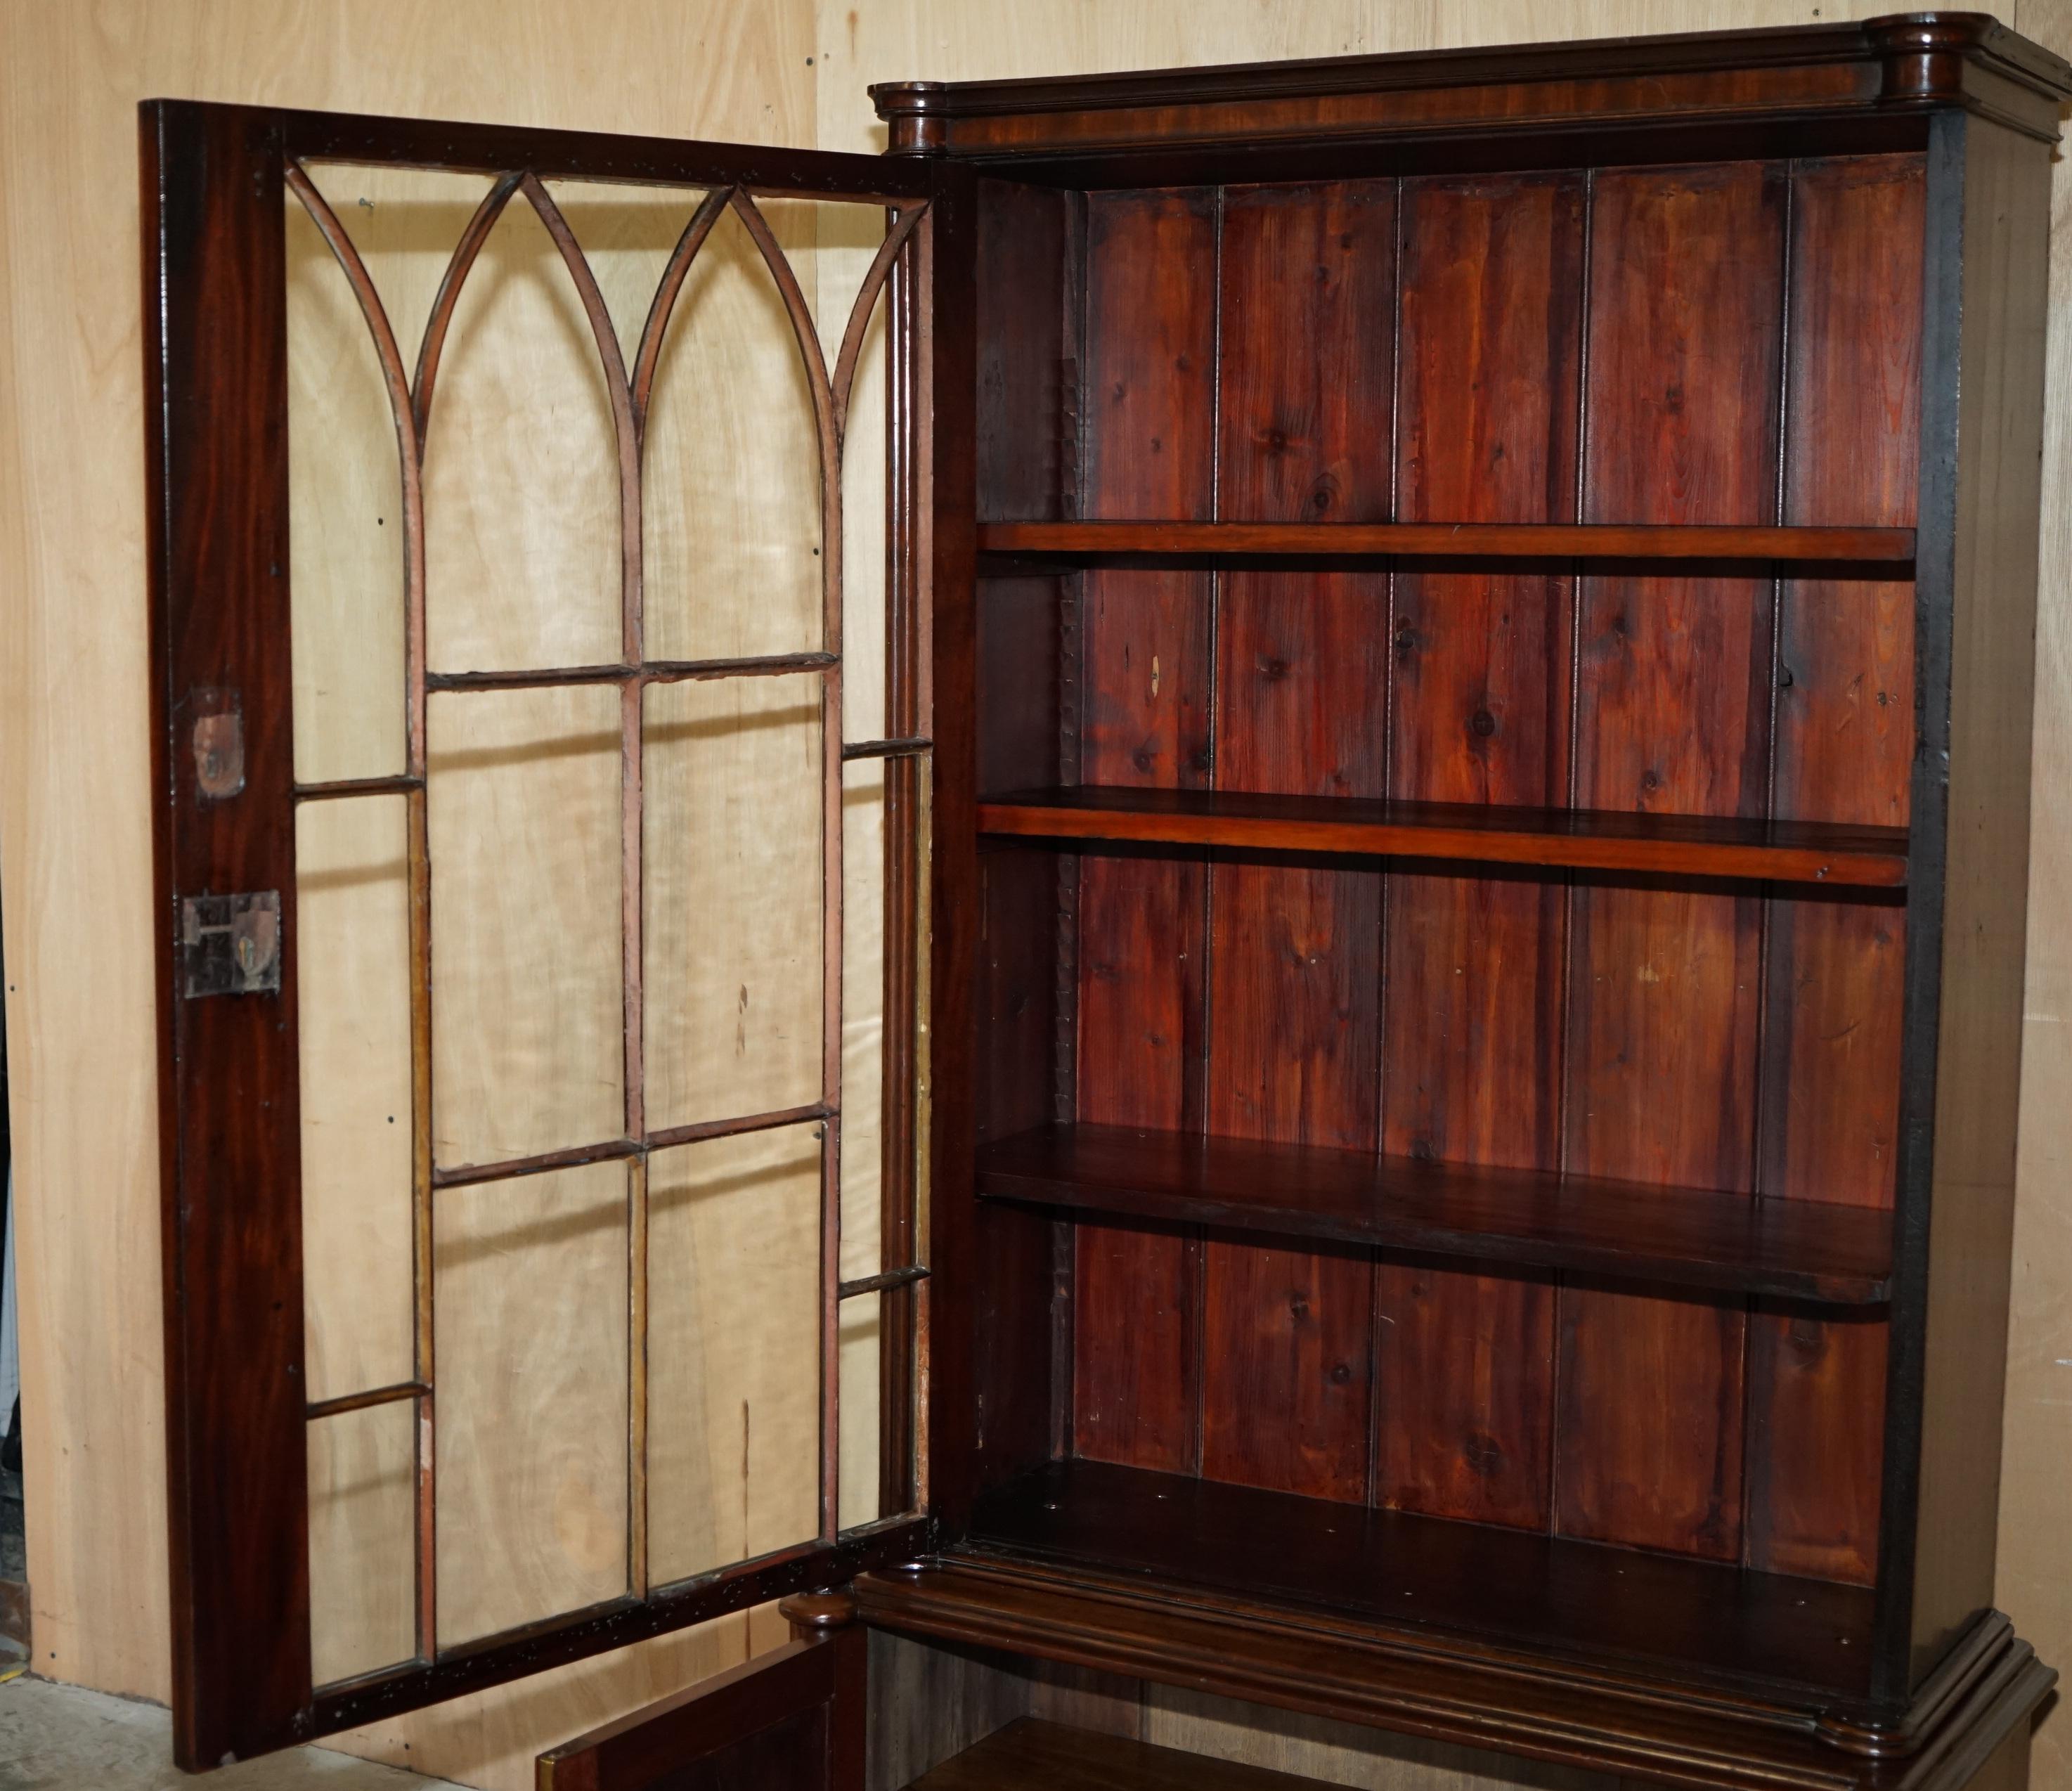 EARLY VICTORIAN GOTHiC REVIVAL ASTRAL GLAZED LIBRARY BOOKCASE WITH STEEPLE GLASS For Sale 9